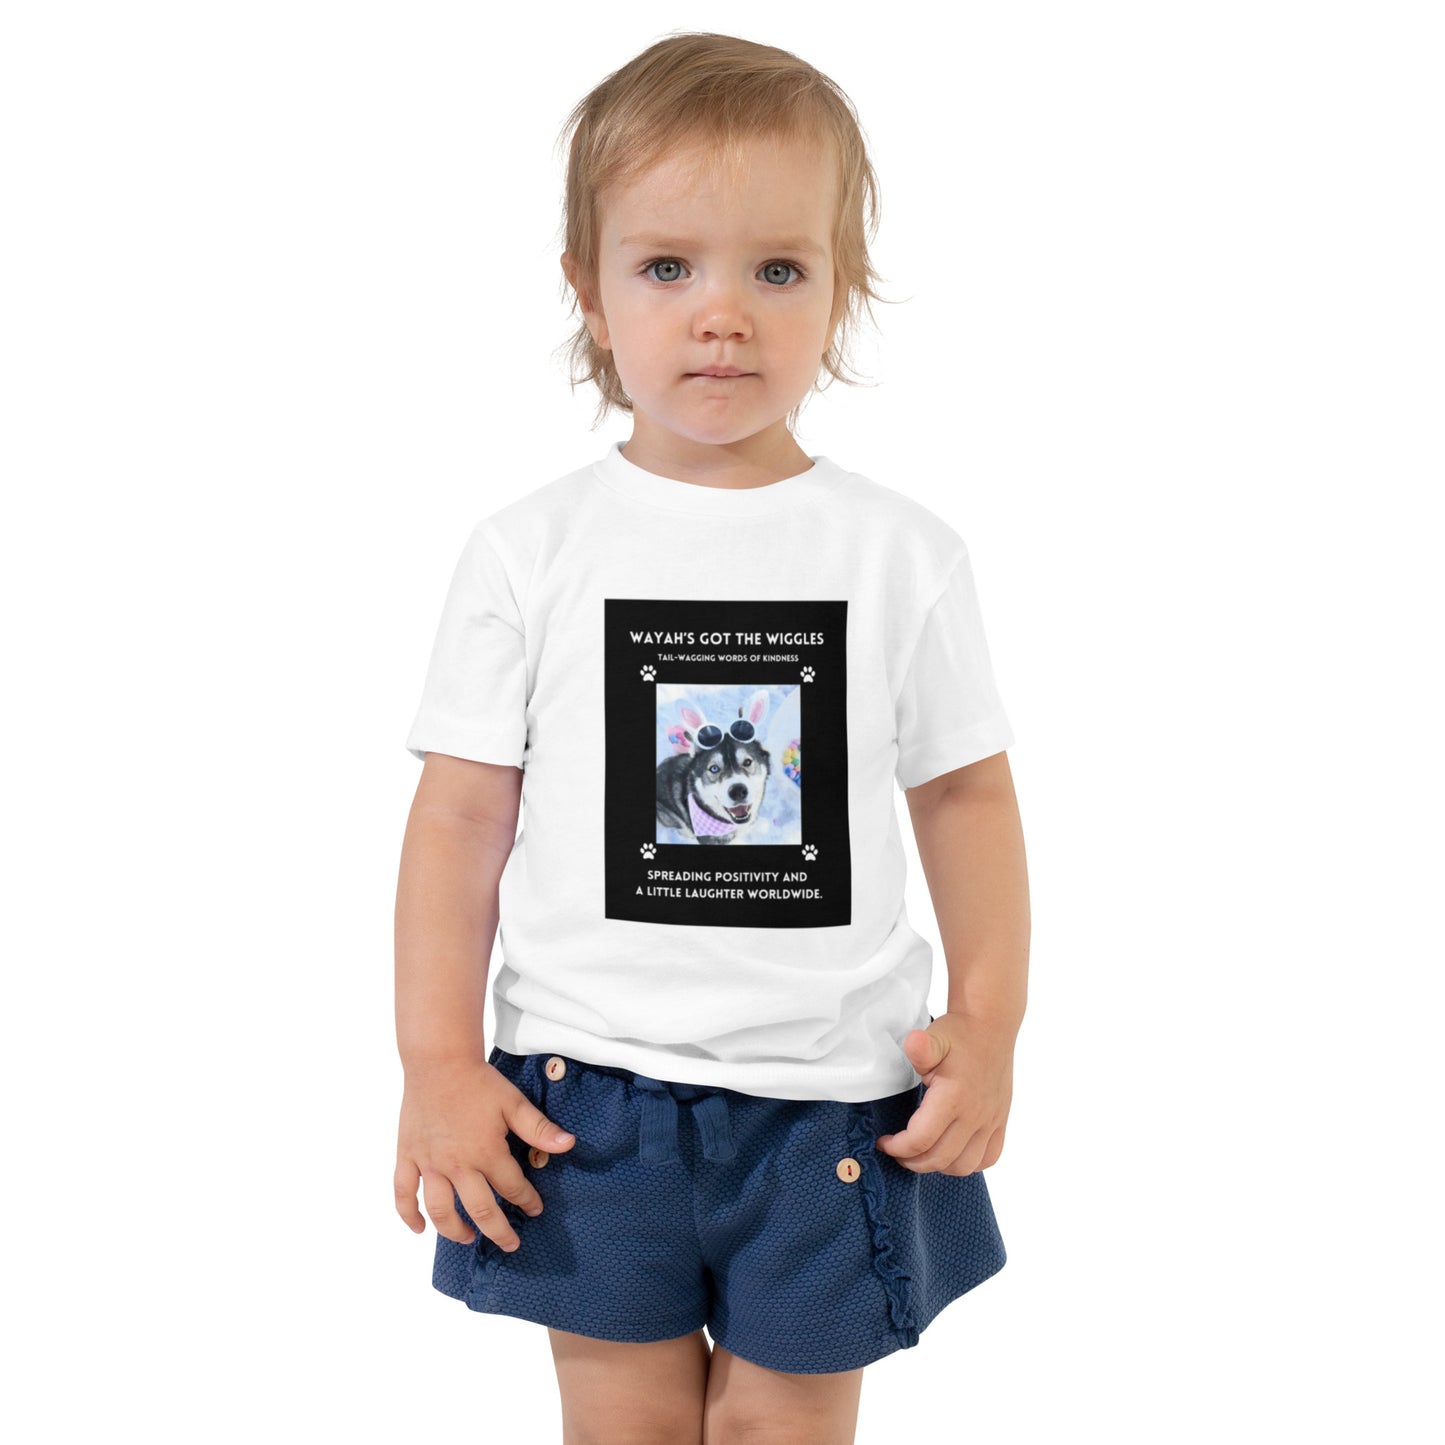 Toddler Short Sleeve Tee- Wayah's Got the Wiggles Collection